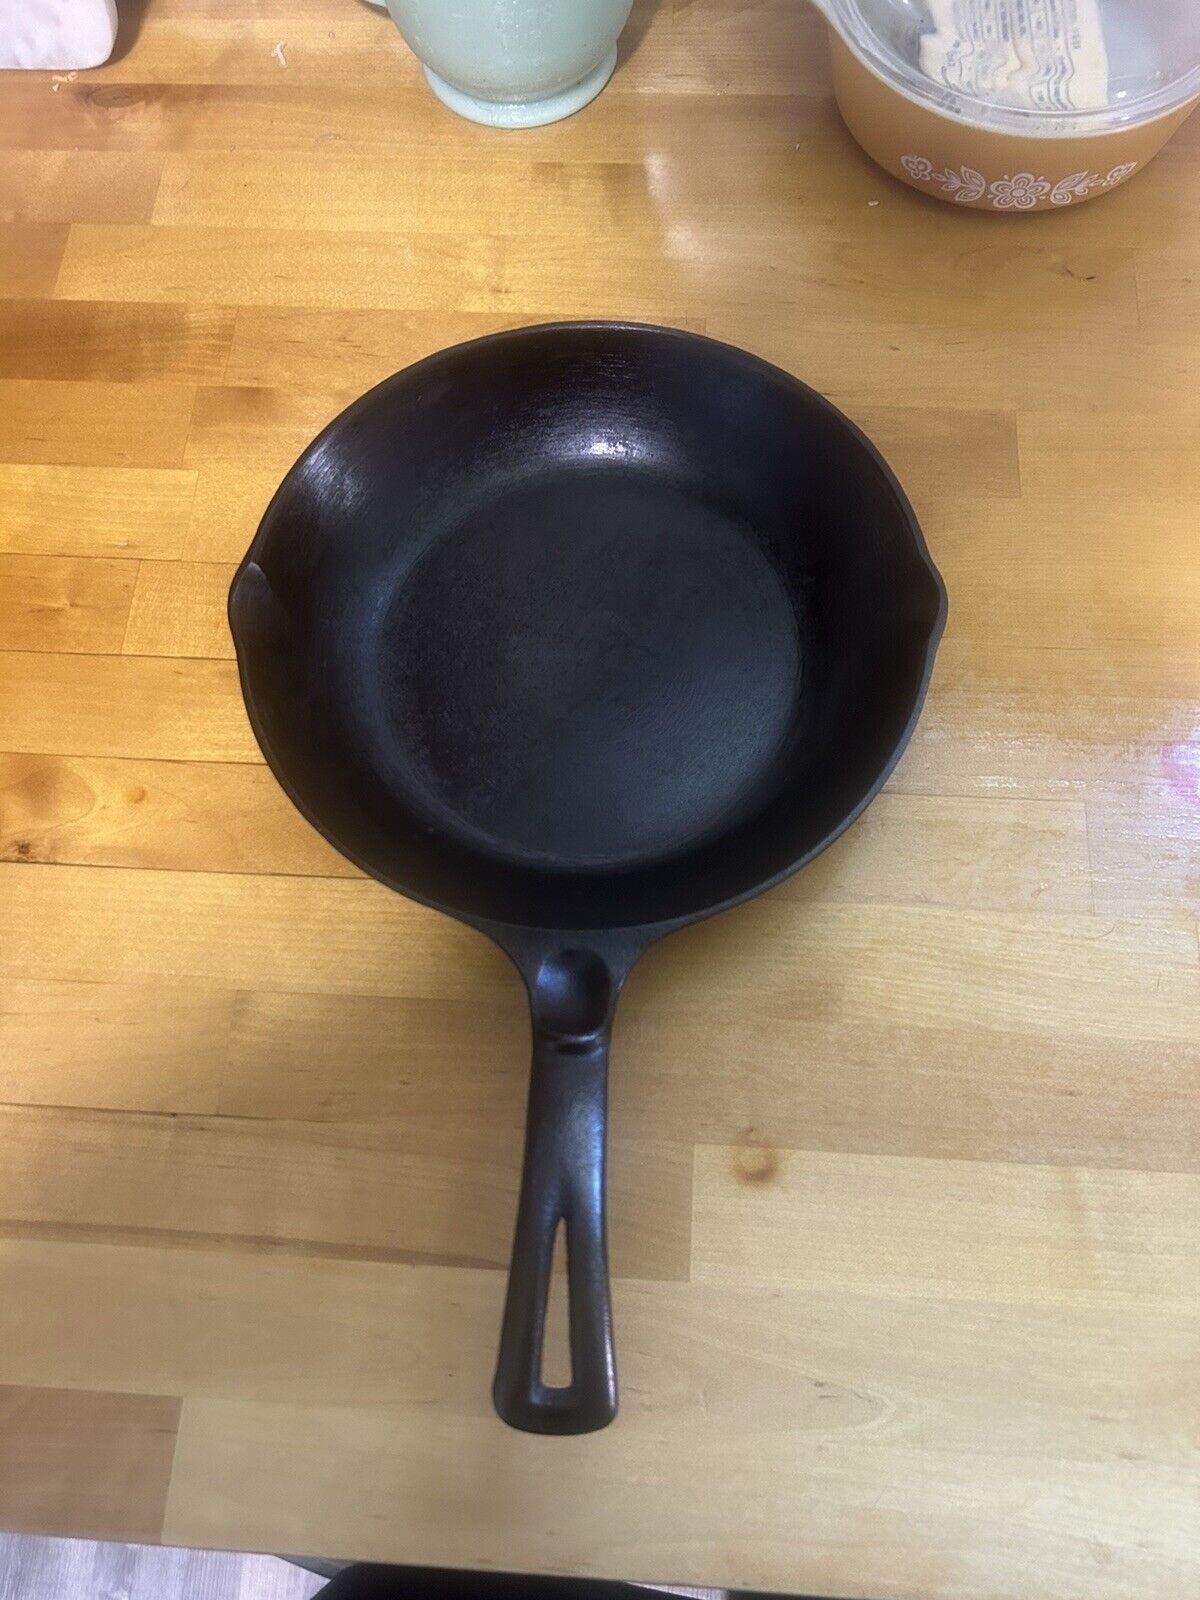 WAGNER CHEF SKILLET 9 INCH 1386C